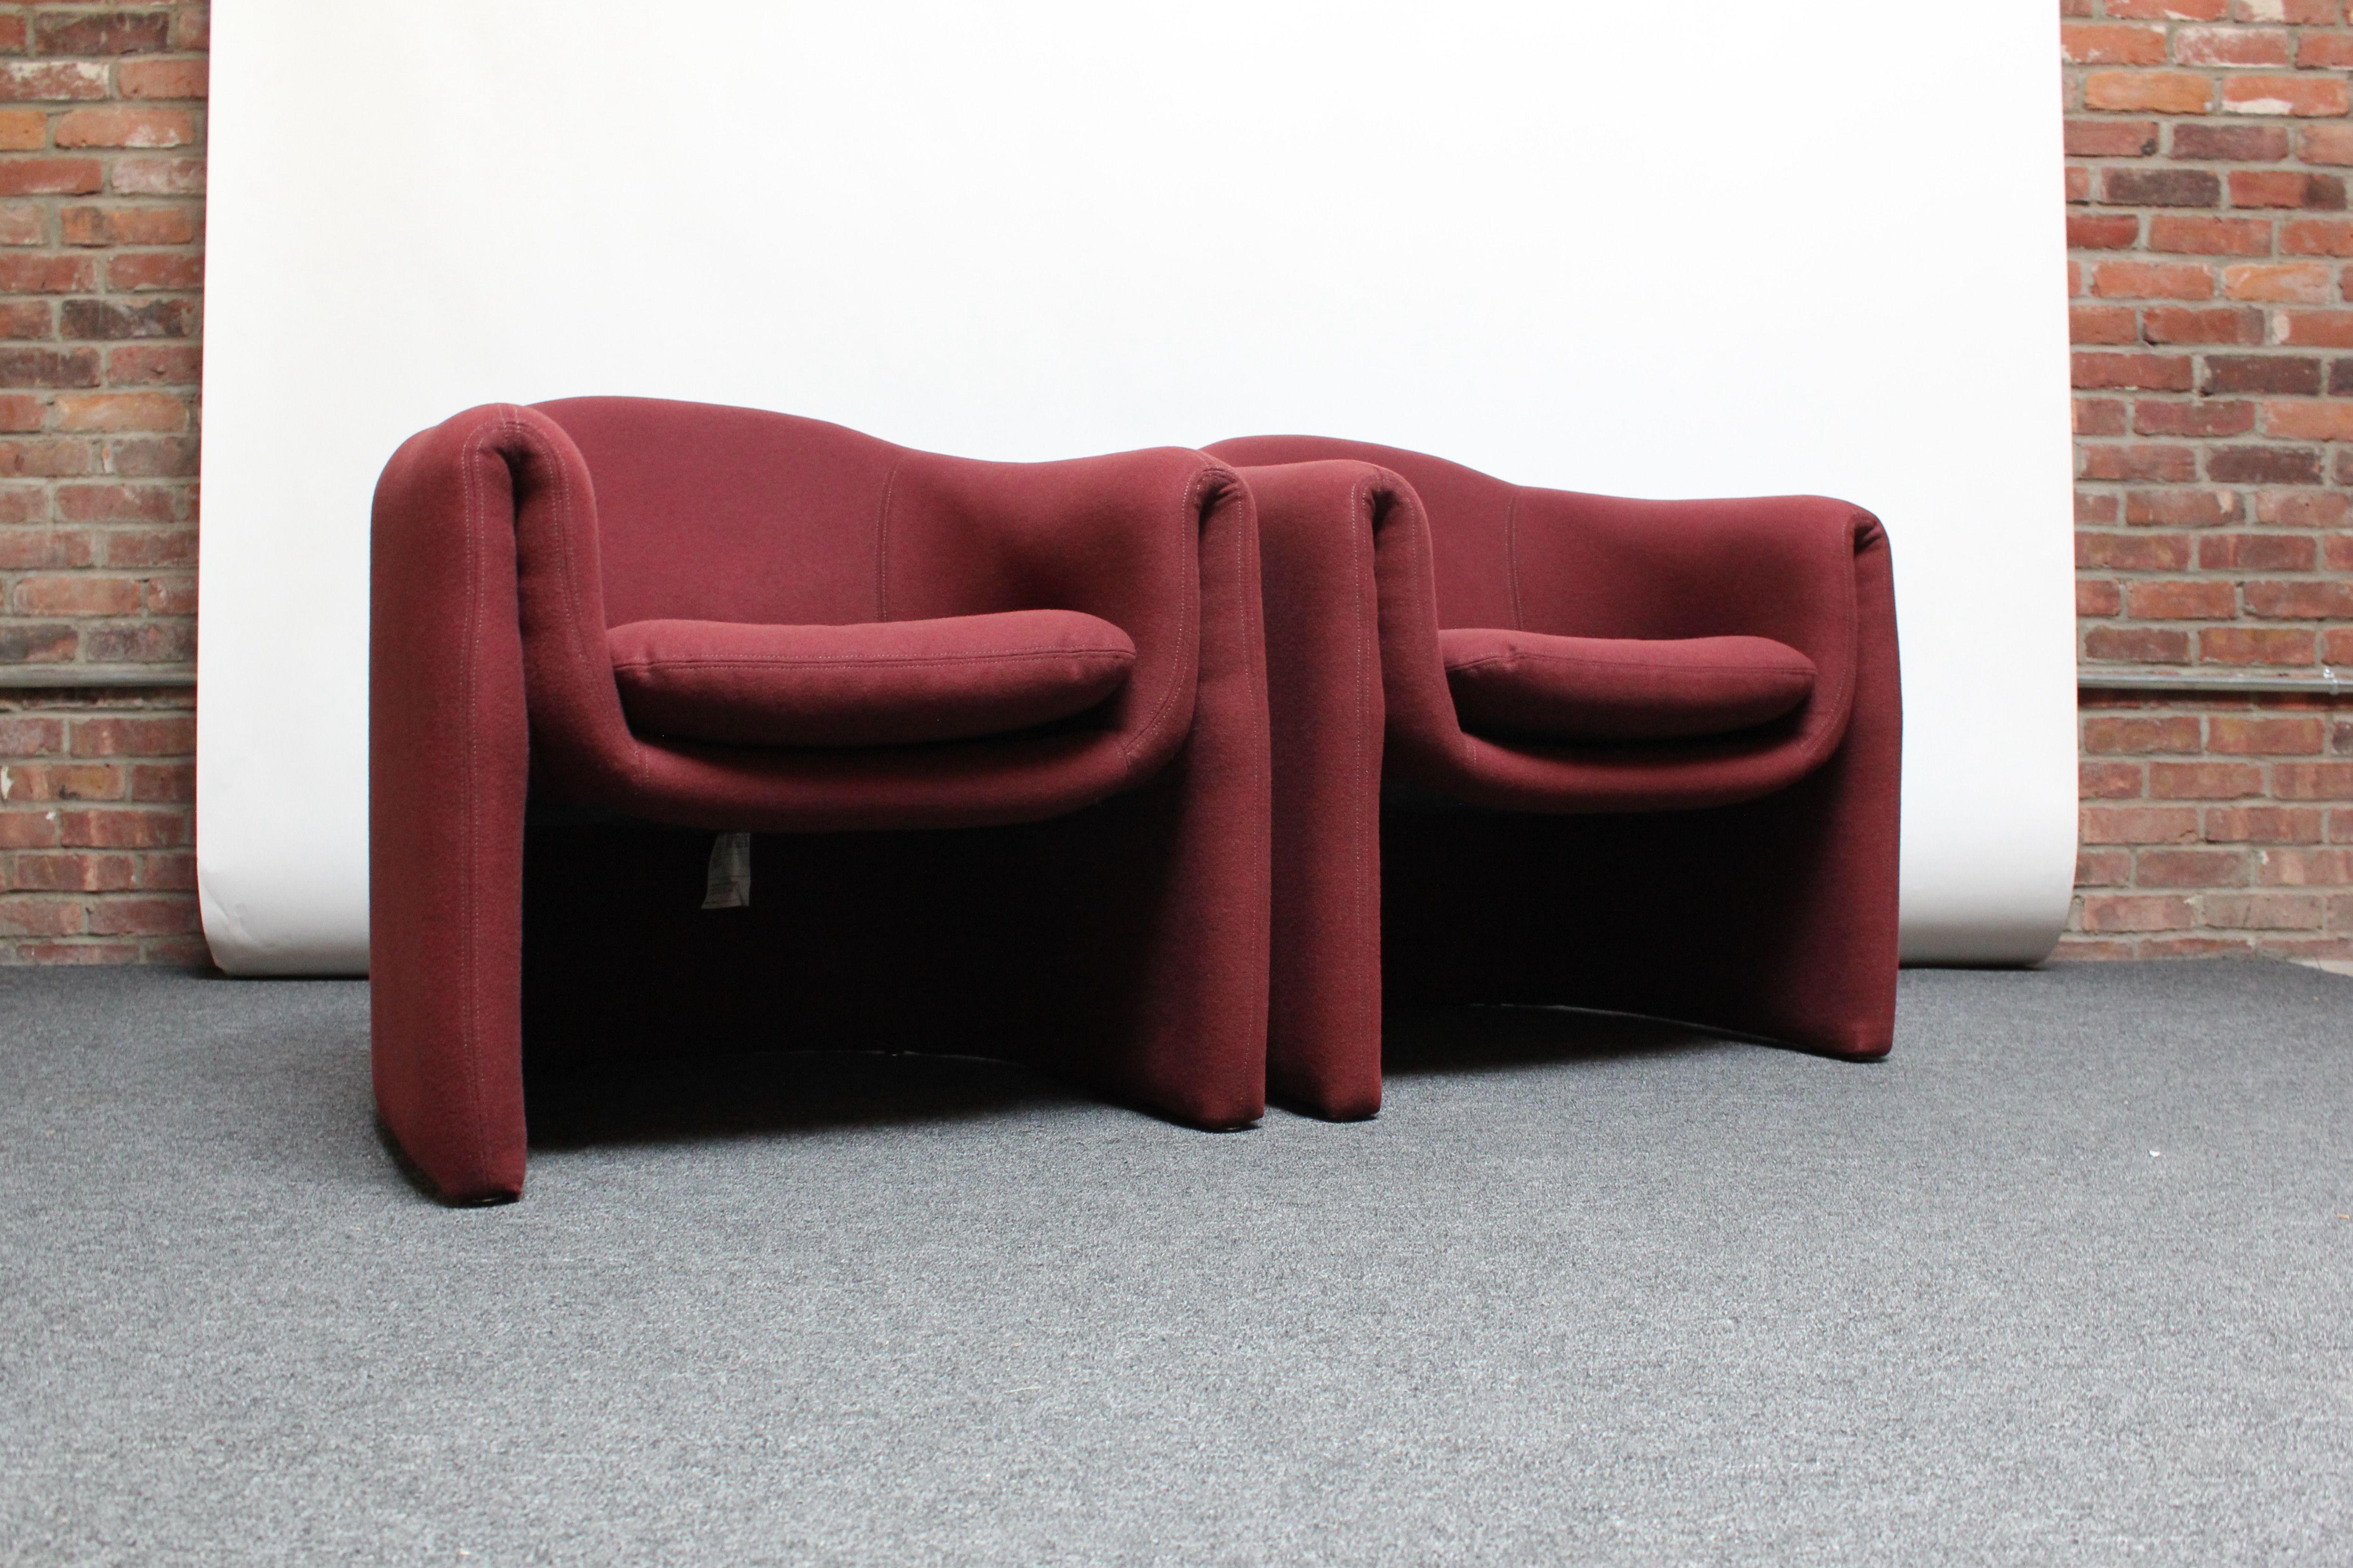 Pair of iconic barrel lounge chairs designed by Vladimir Kagan for Preview (ca. 1980s, USA).
Relatively small in scale, yet perfectly proportioned to offer maximum comfort. Attractive biomorphic shape and sinuous frame with continuous seat cradle